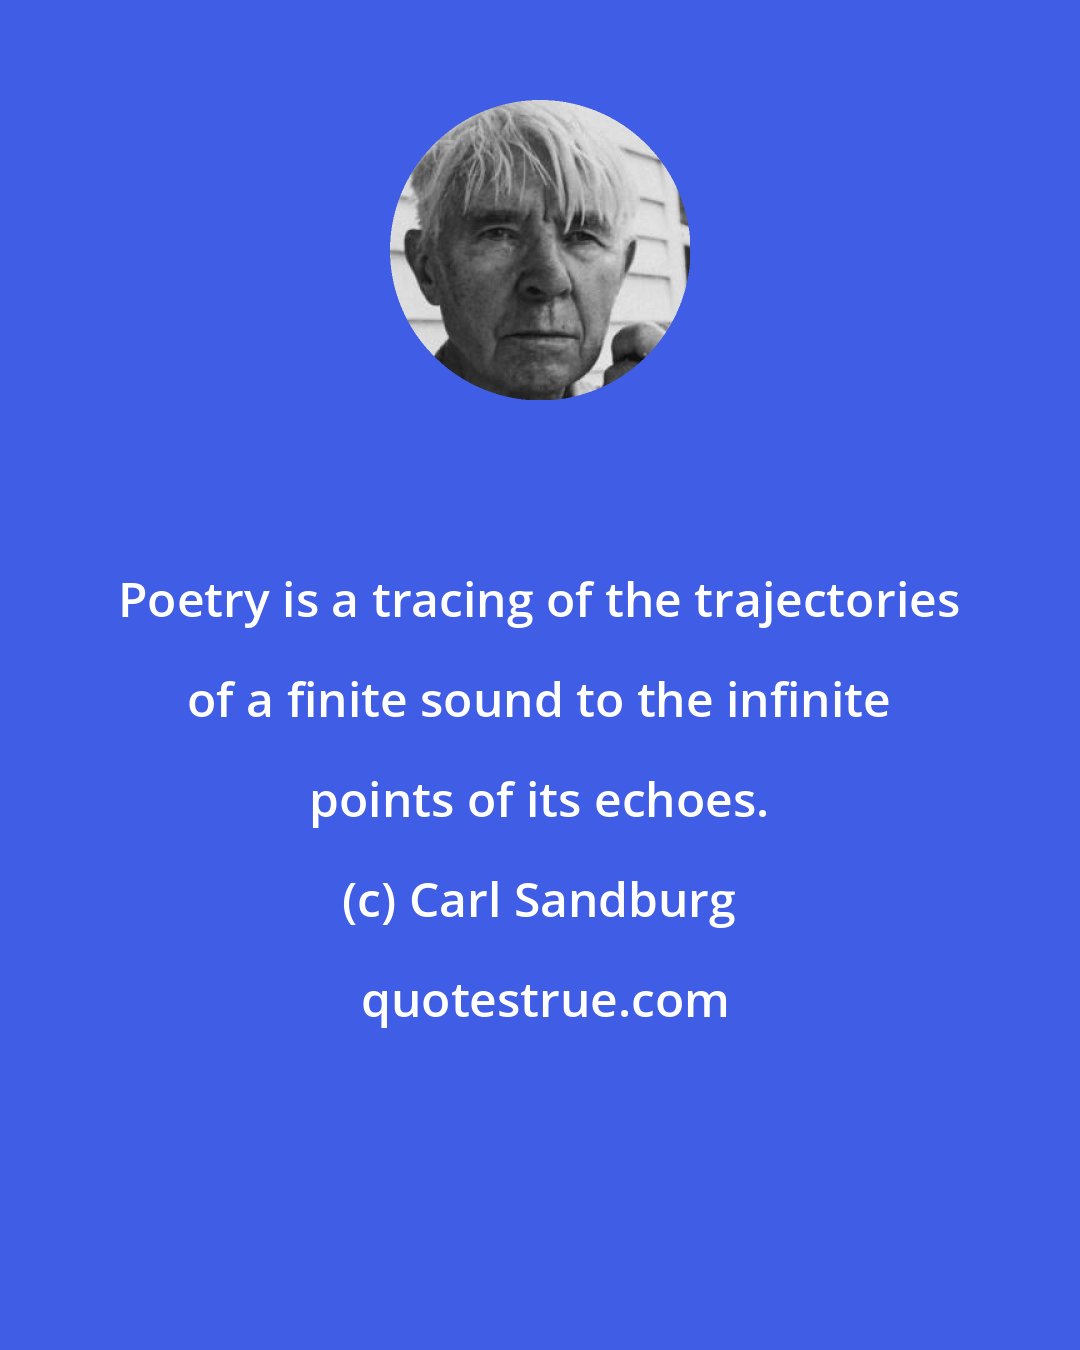 Carl Sandburg: Poetry is a tracing of the trajectories of a finite sound to the infinite points of its echoes.